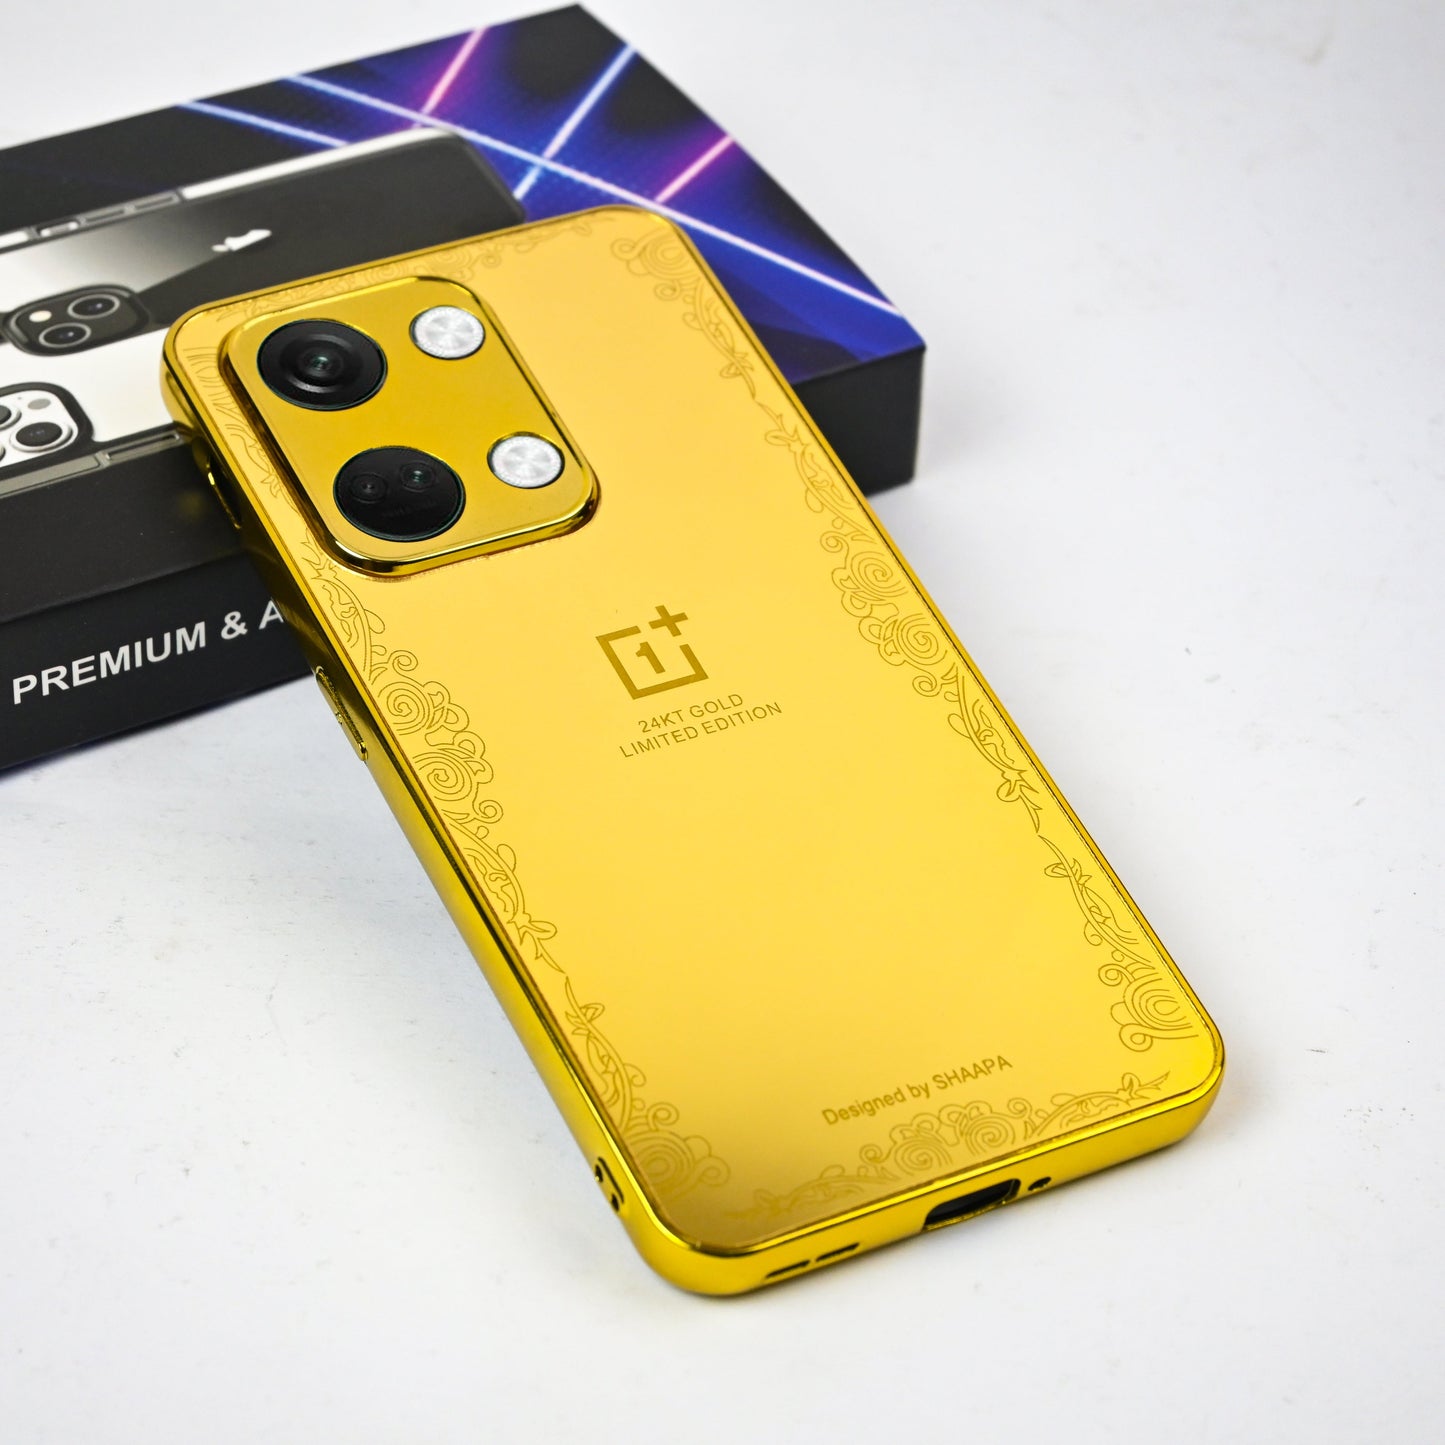 Exclusive Handcrafted Gold Plated Case - OnePlus (Buy 1 Get 1)